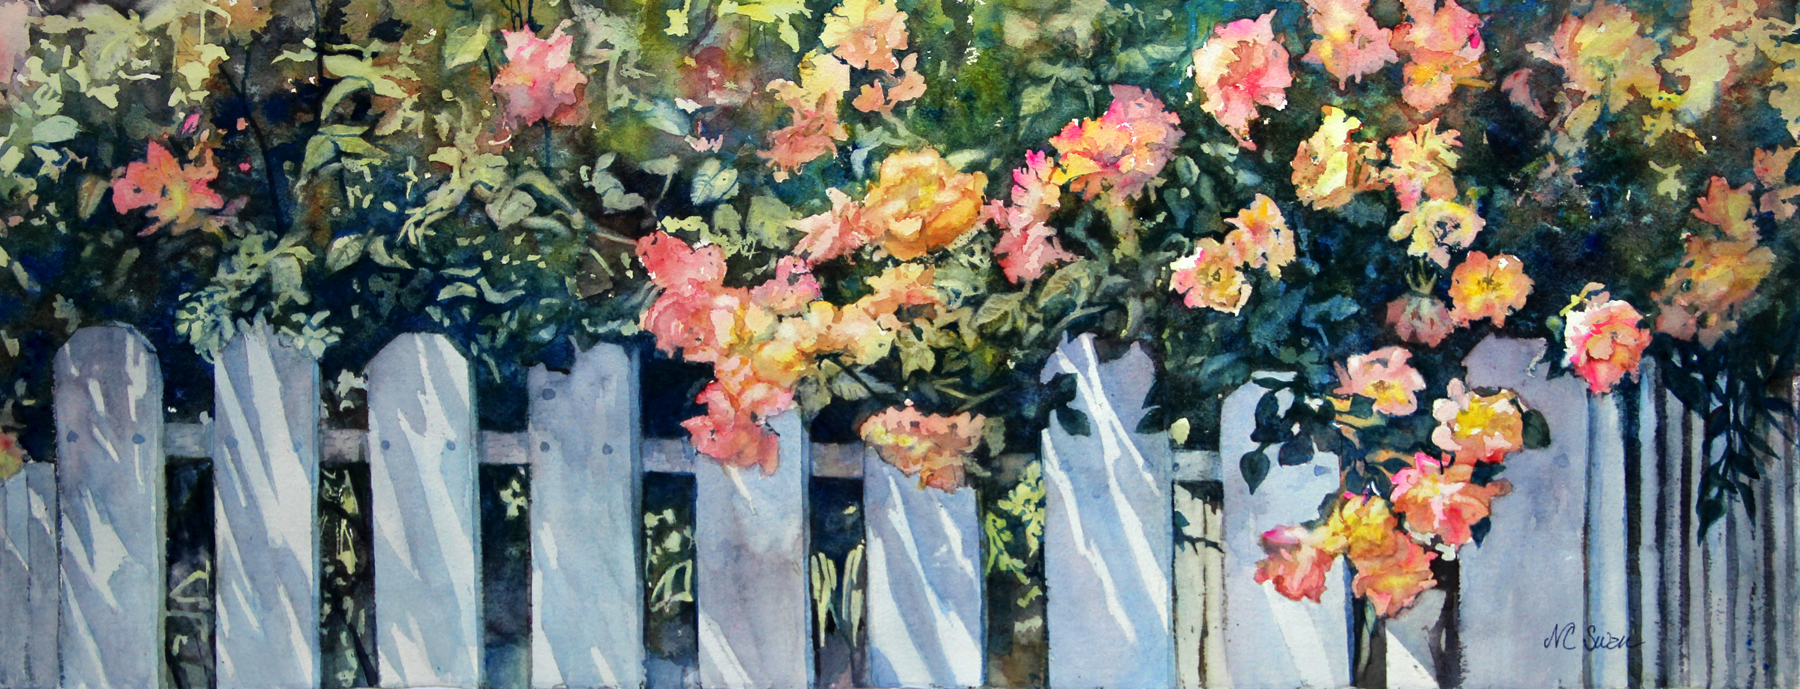 climbing roses cascading over a white picket fence